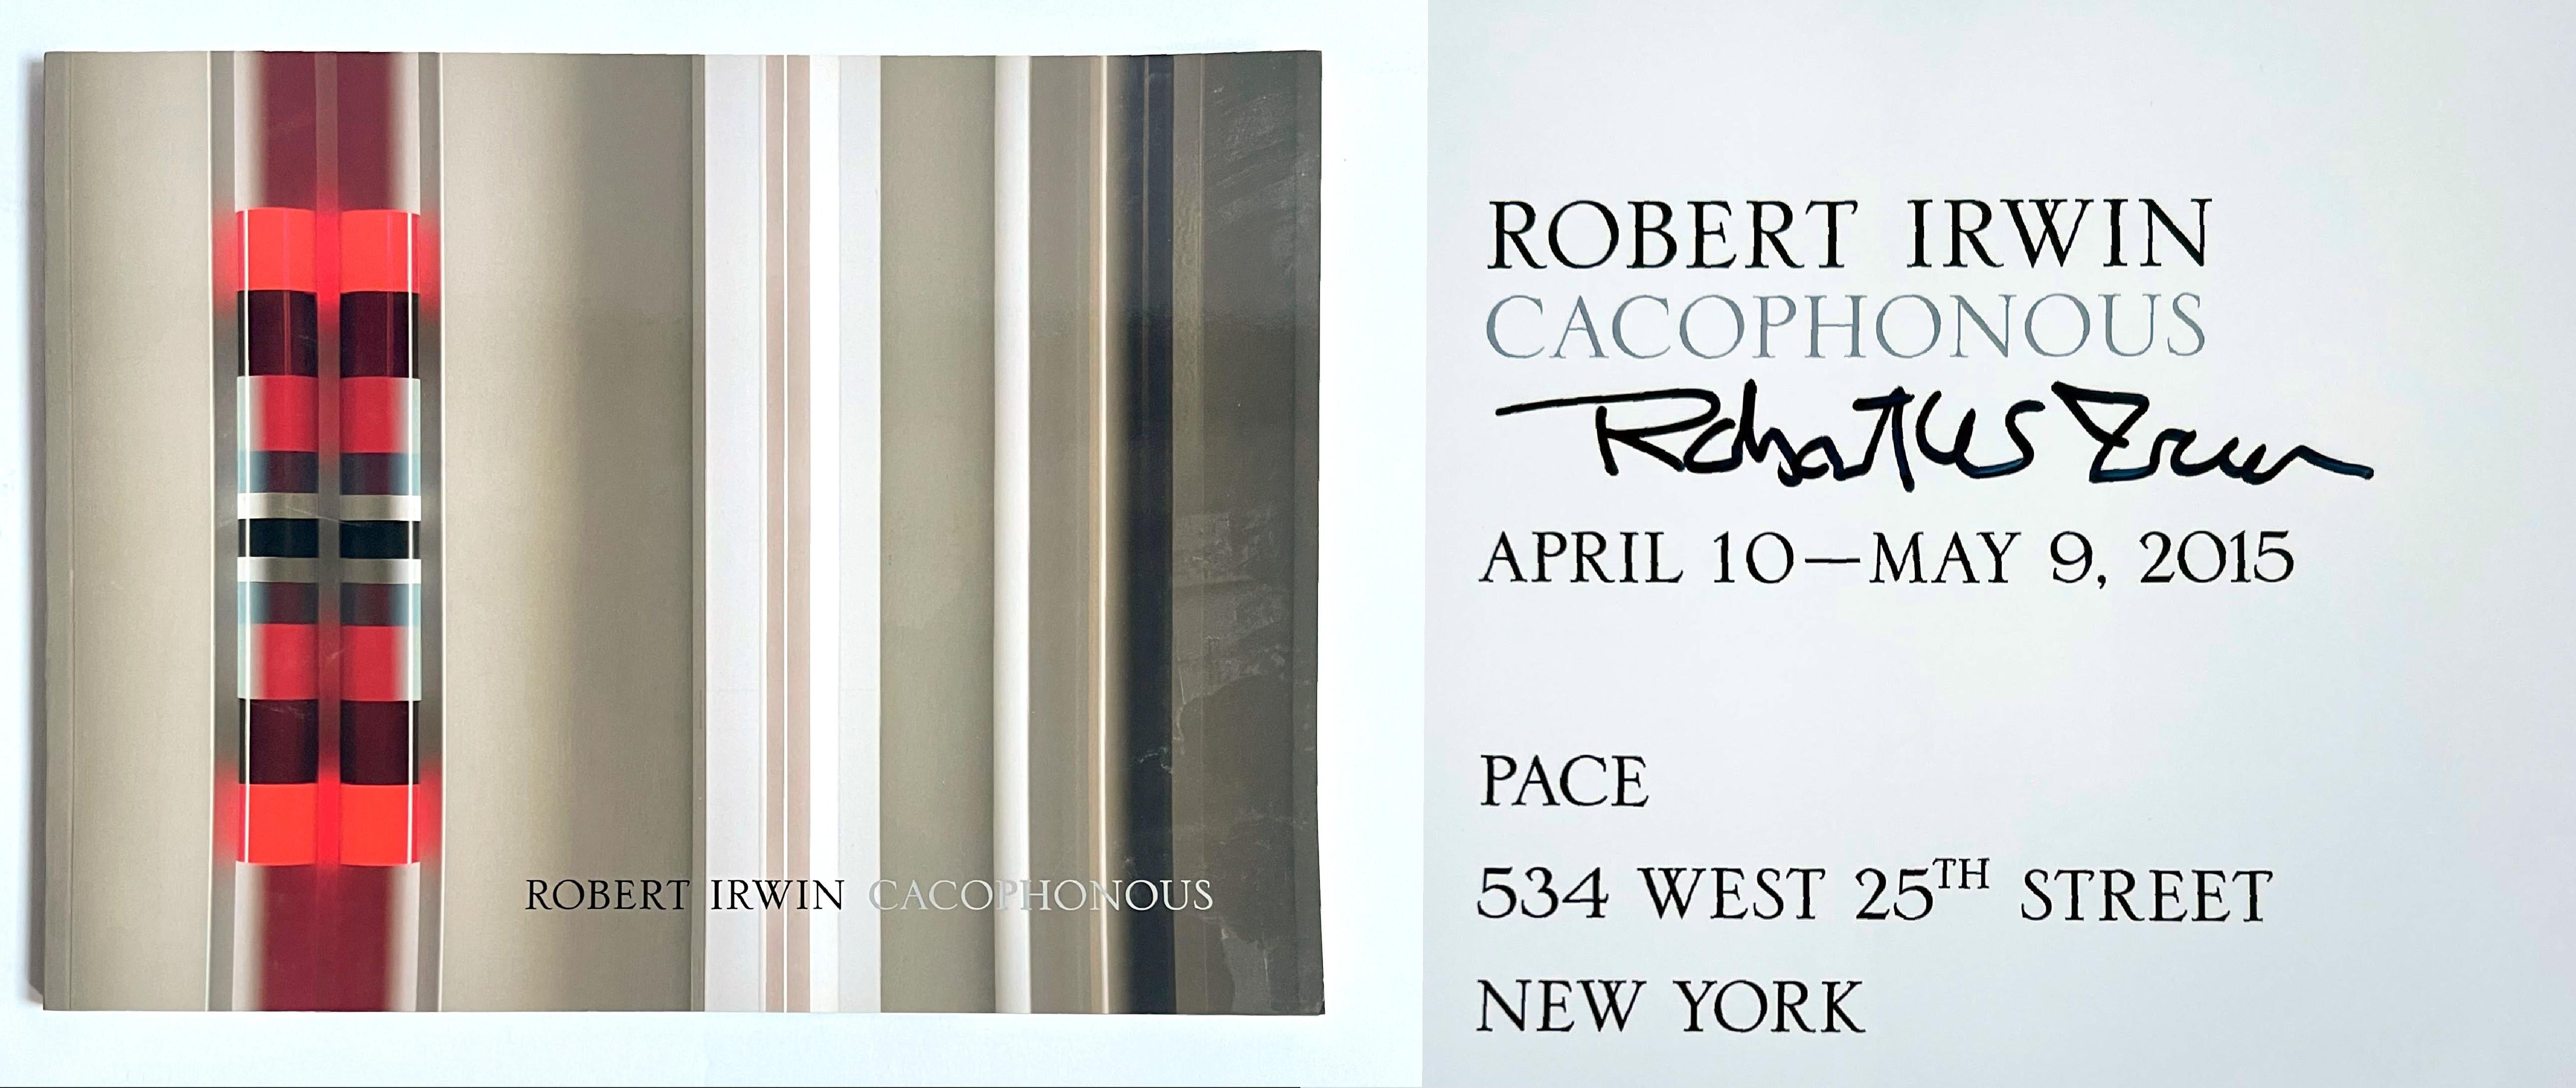 Robert Irwin
Cacophonous (hand signed by Robert Irwin), 2015
Softback exhibition catalogue with stiff wraps (hand signed by Robert Irwin)
Hand signed by Robert Irwin on the title page
9 × 11 3/4 × 33/100 inches
Unframed
This elegant illustrated